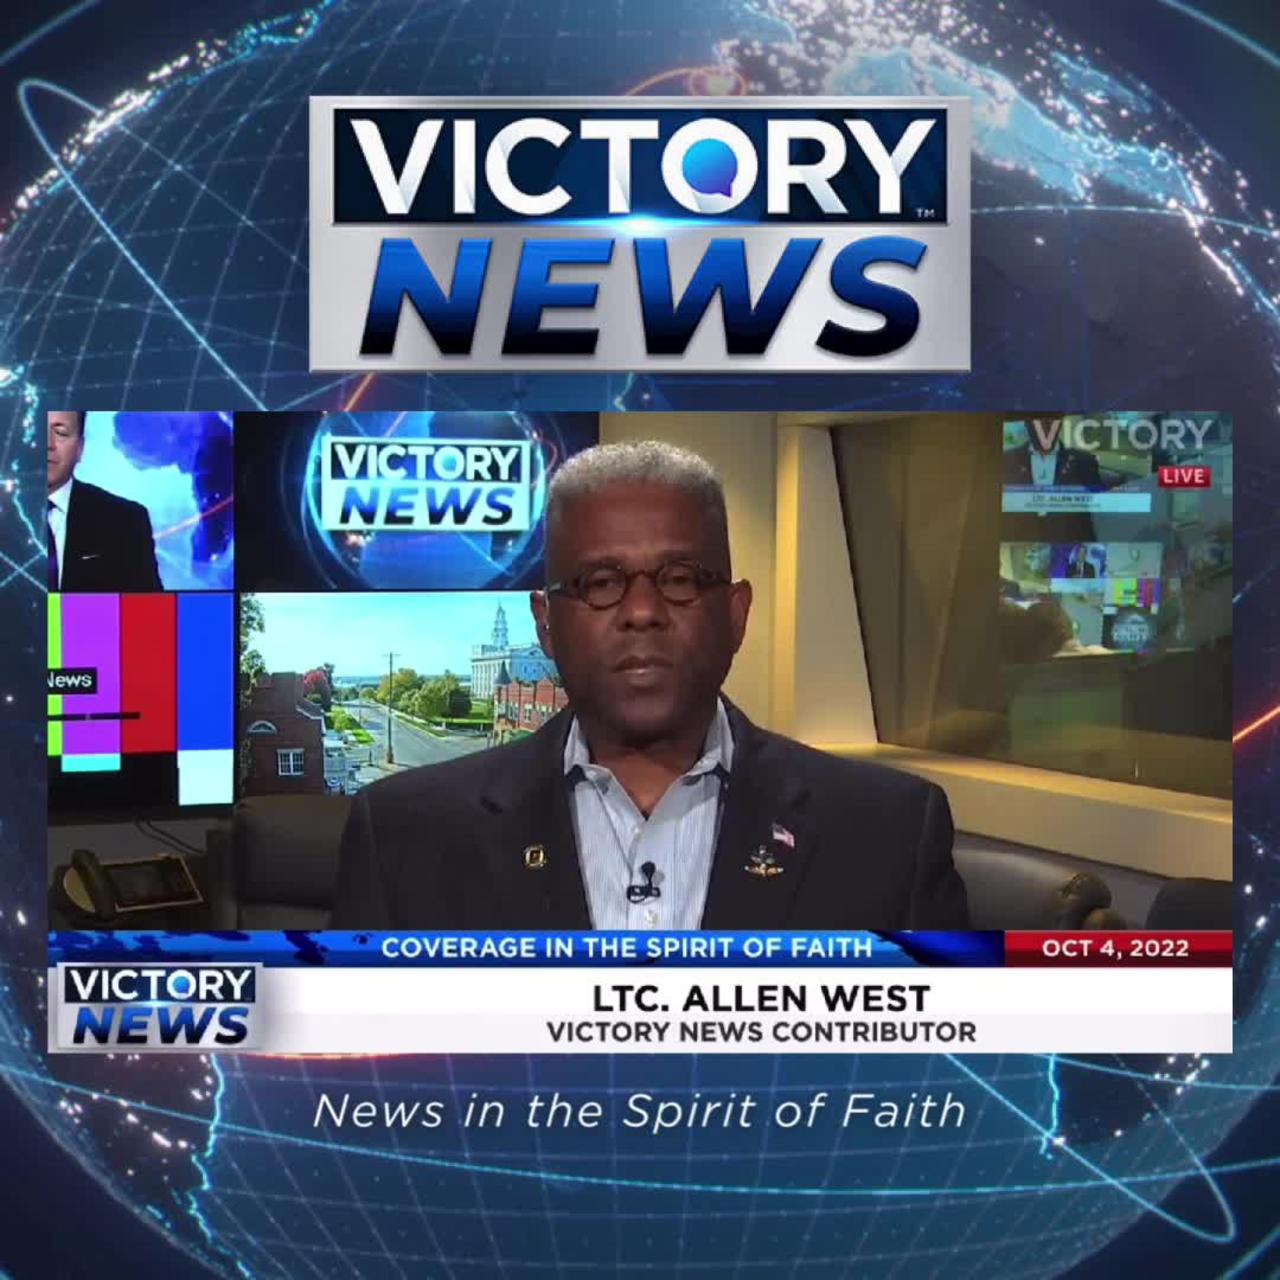 VICTORY News 10/4/22-4 pm: How Desperate is Planned Parenthood to Kill The Unborn? (LTC. Allen West)